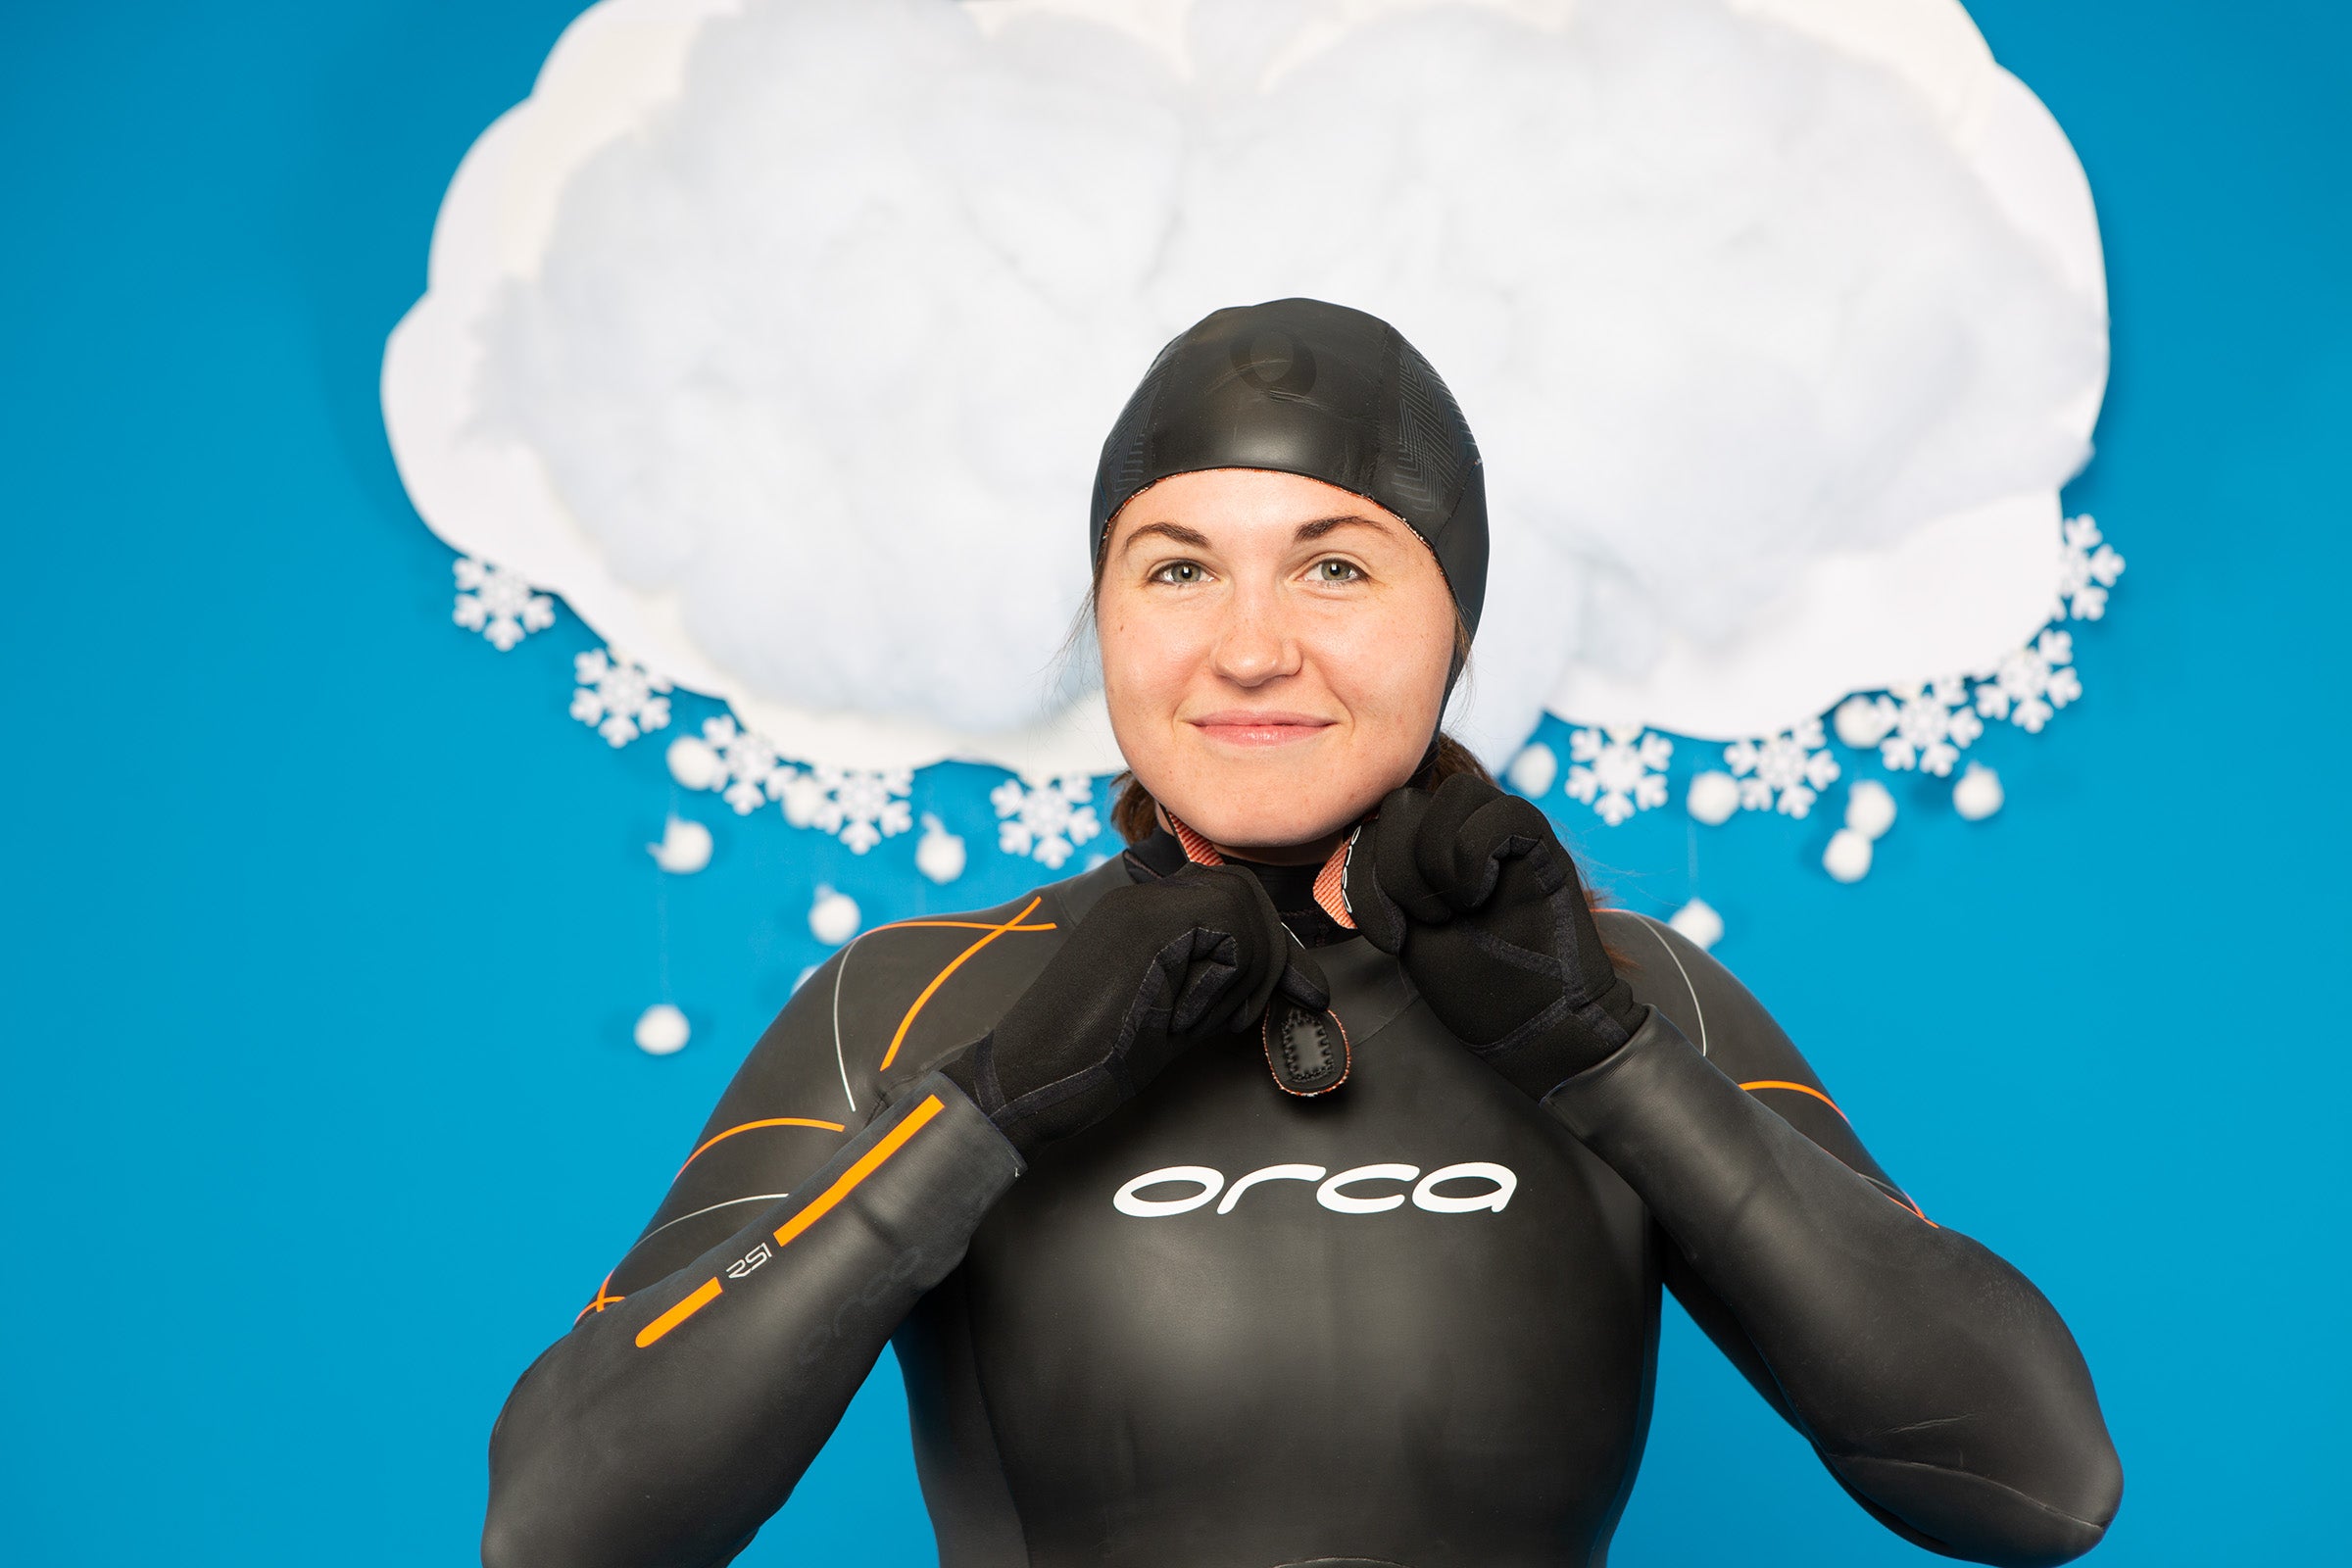 a model demonstrates What to wear for a cold open-water swim